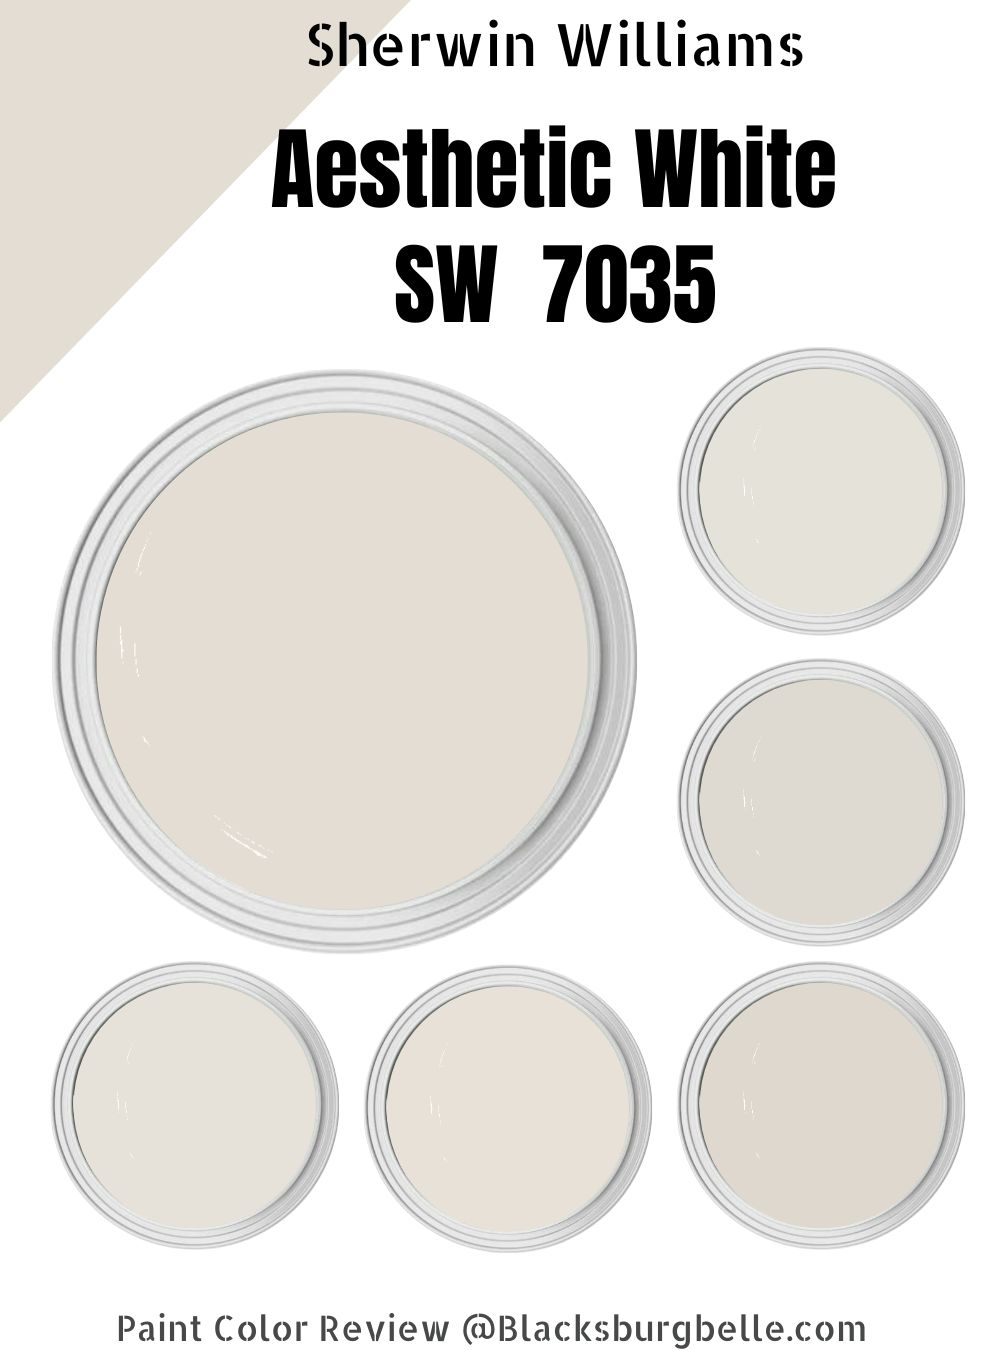 Aesthetic White SW 7035, White Paint Colors